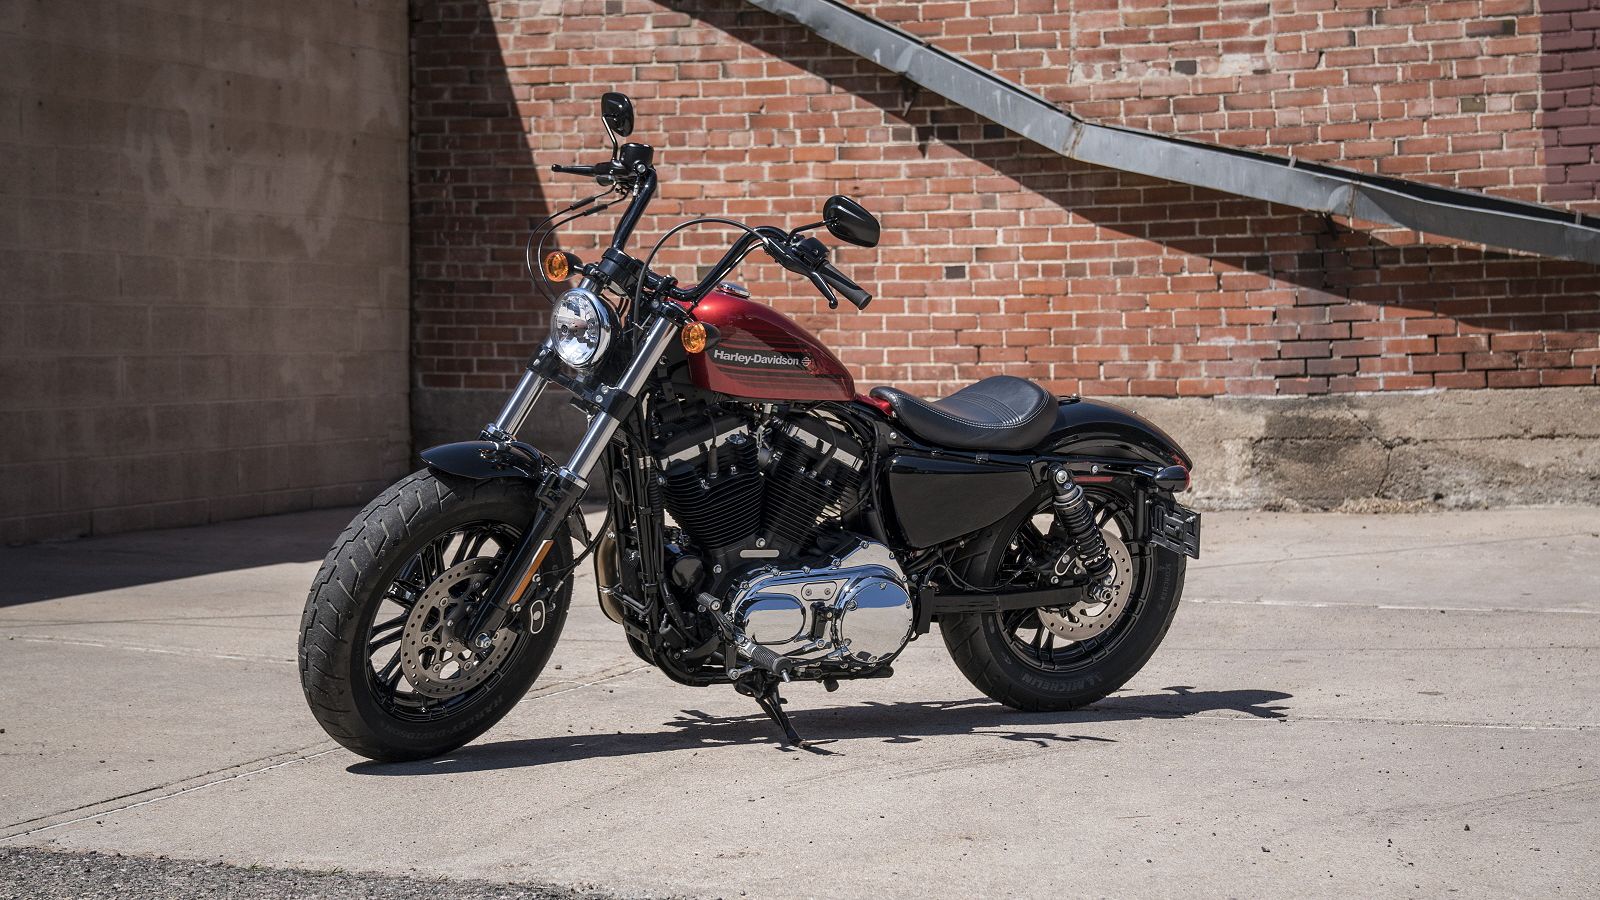 2019 Harley Davidson Forty Eight Special Picture, Photo